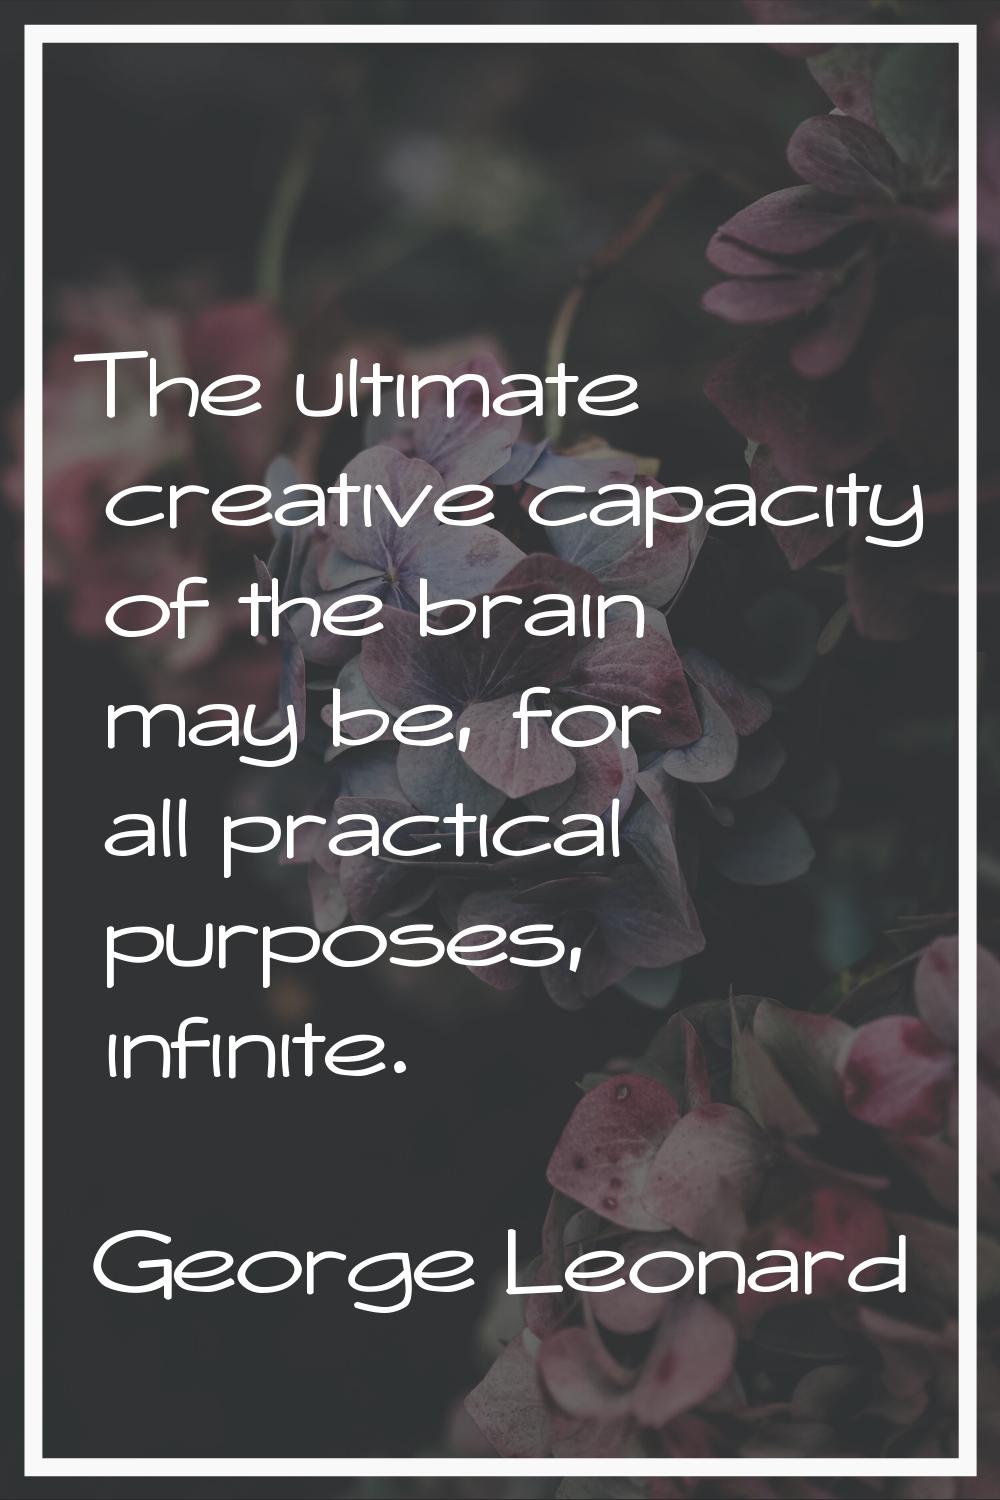 The ultimate creative capacity of the brain may be, for all practical purposes, infinite.